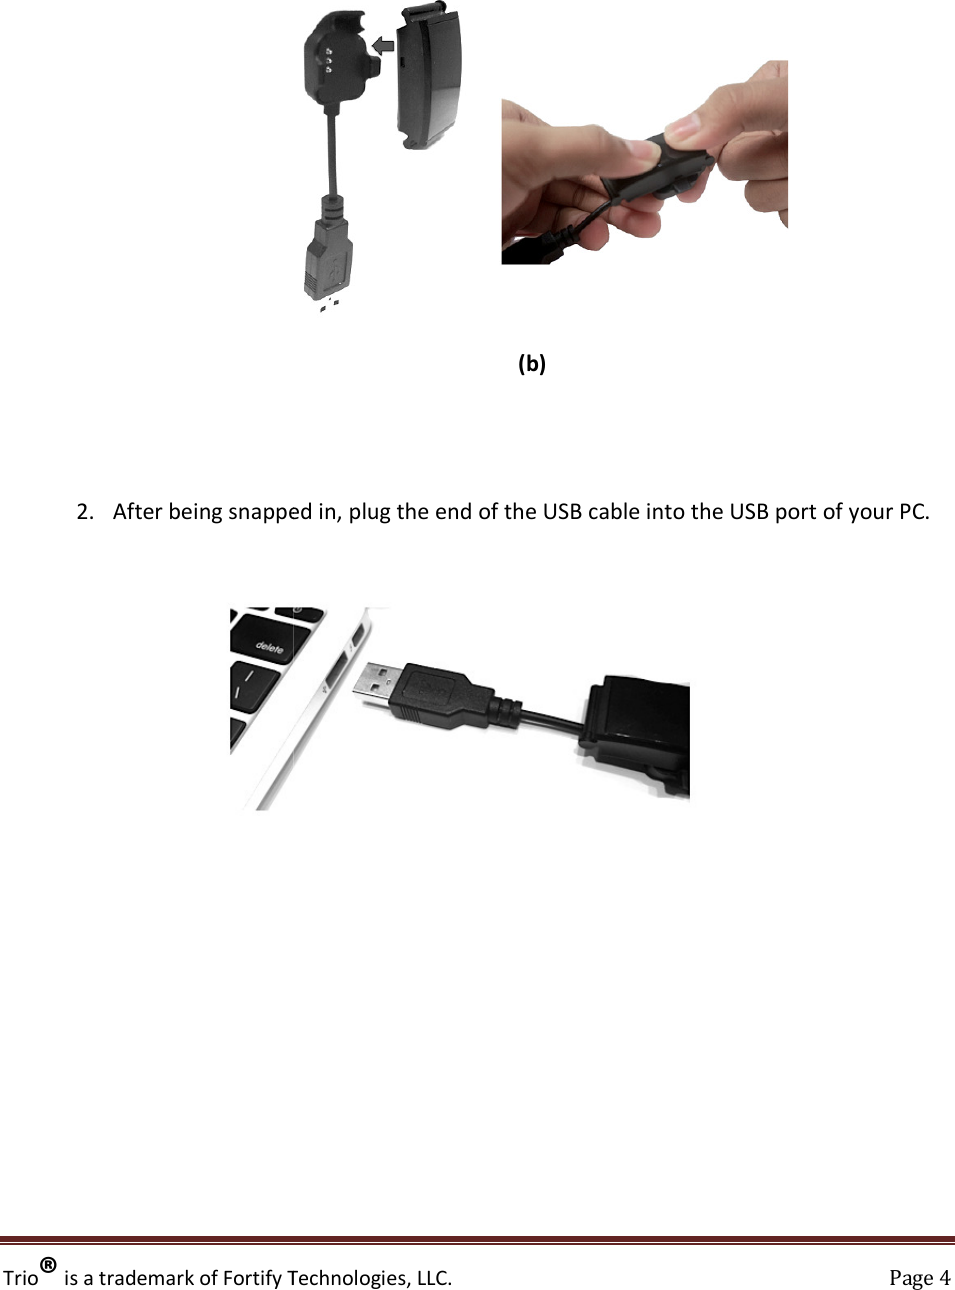 Trio® is a trademark of Fortify Technologies, LLC.                                                            2. After being snapped                       is a trademark of Fortify Technologies, LLC.   (b) being snapped in, plug the end of the USB cable into the USB port of your PC.Page 4  , plug the end of the USB cable into the USB port of your PC. 